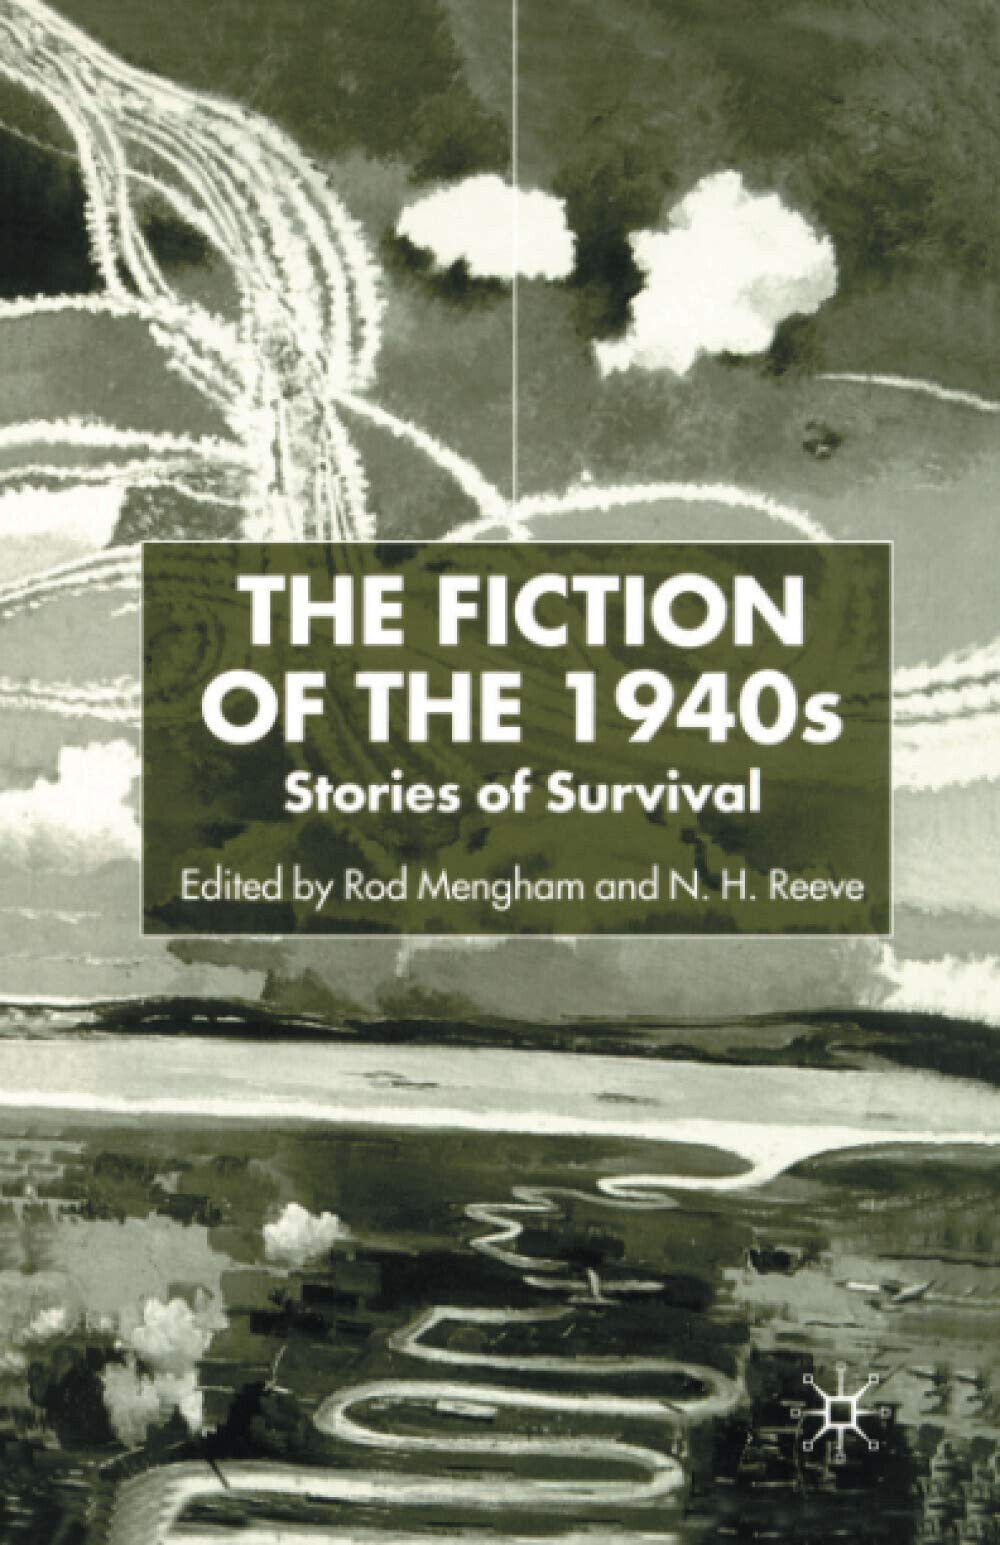 The Fiction of the 1940s: Stories of Survival - N. Reeve - palgrave, 2001 libro usato